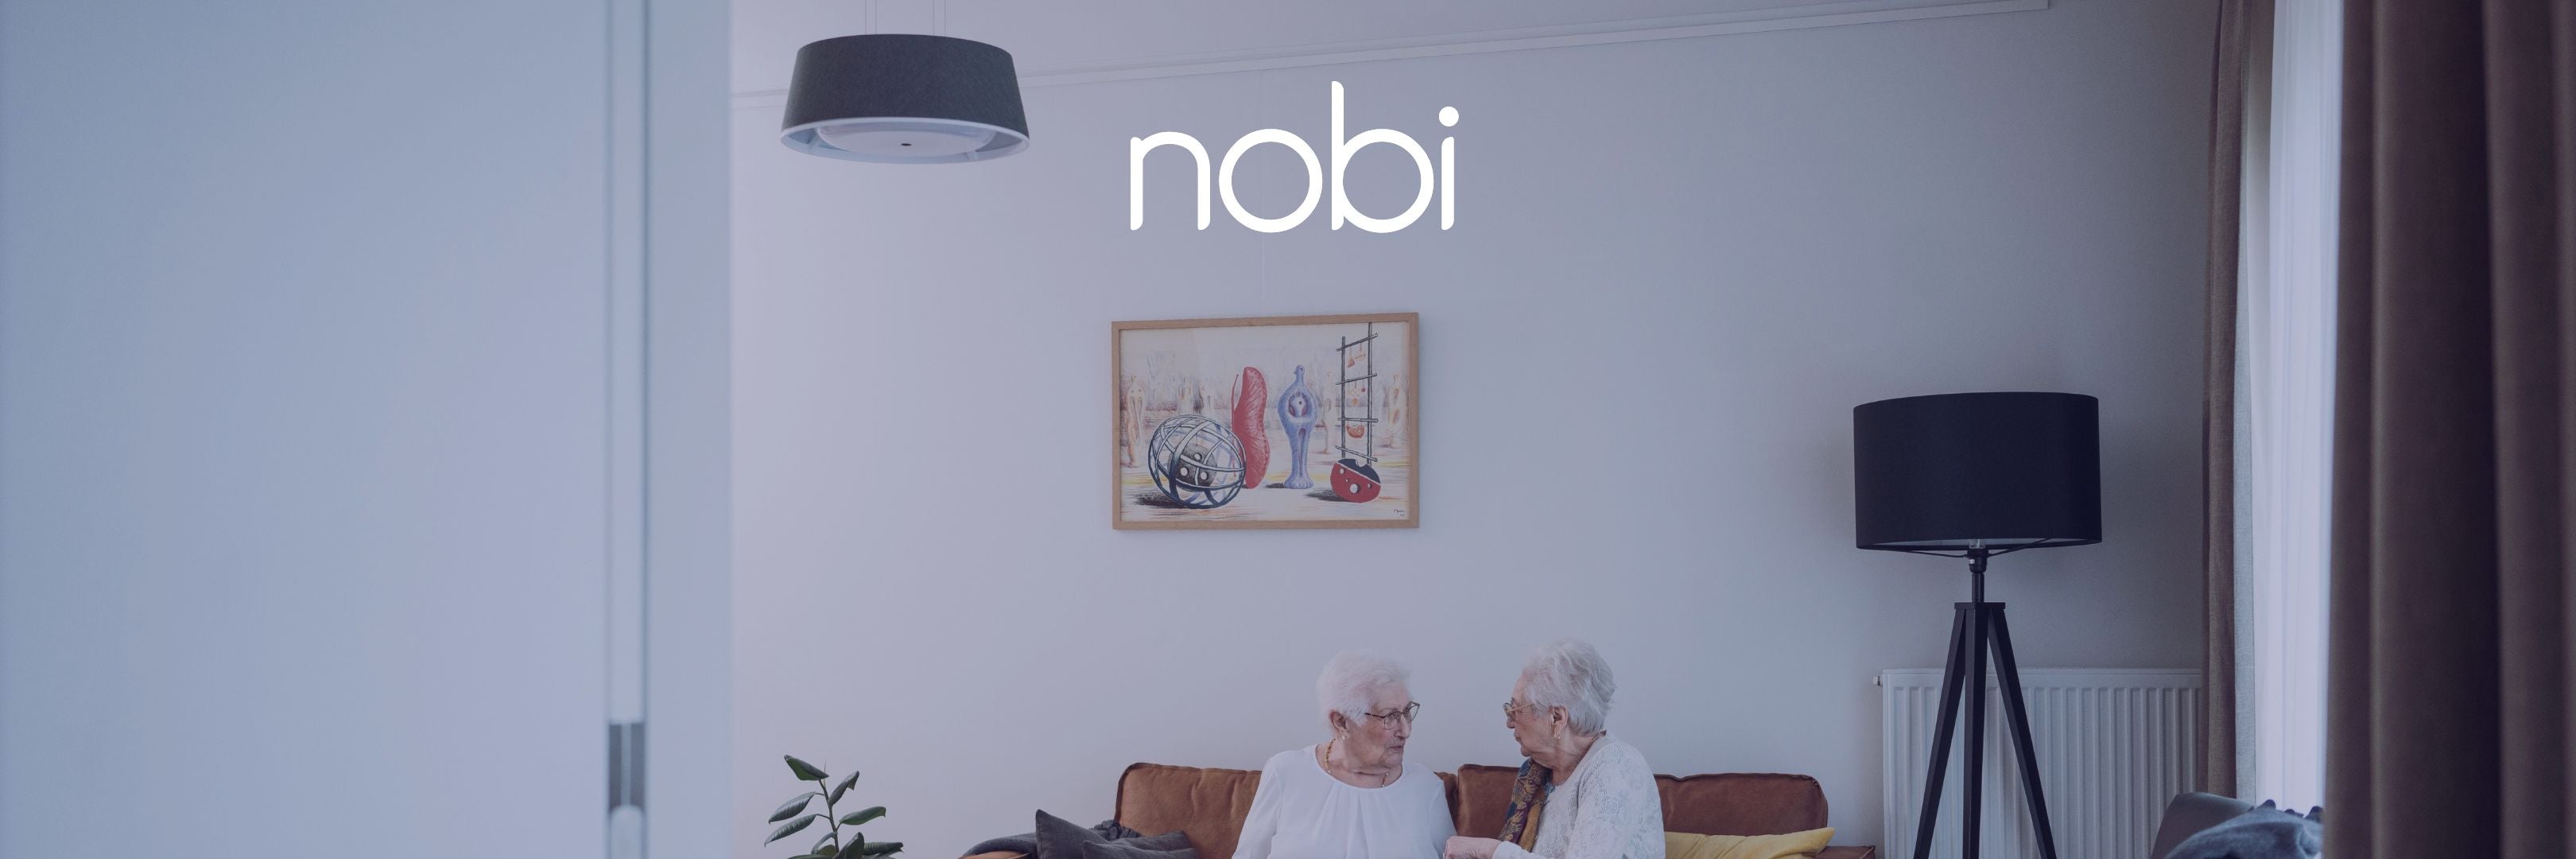 Nobi, Safe and happy living The smart FALL DETECTION lamp that helps ensure older adults can age more INDEPENDENTLY and CAREFREE